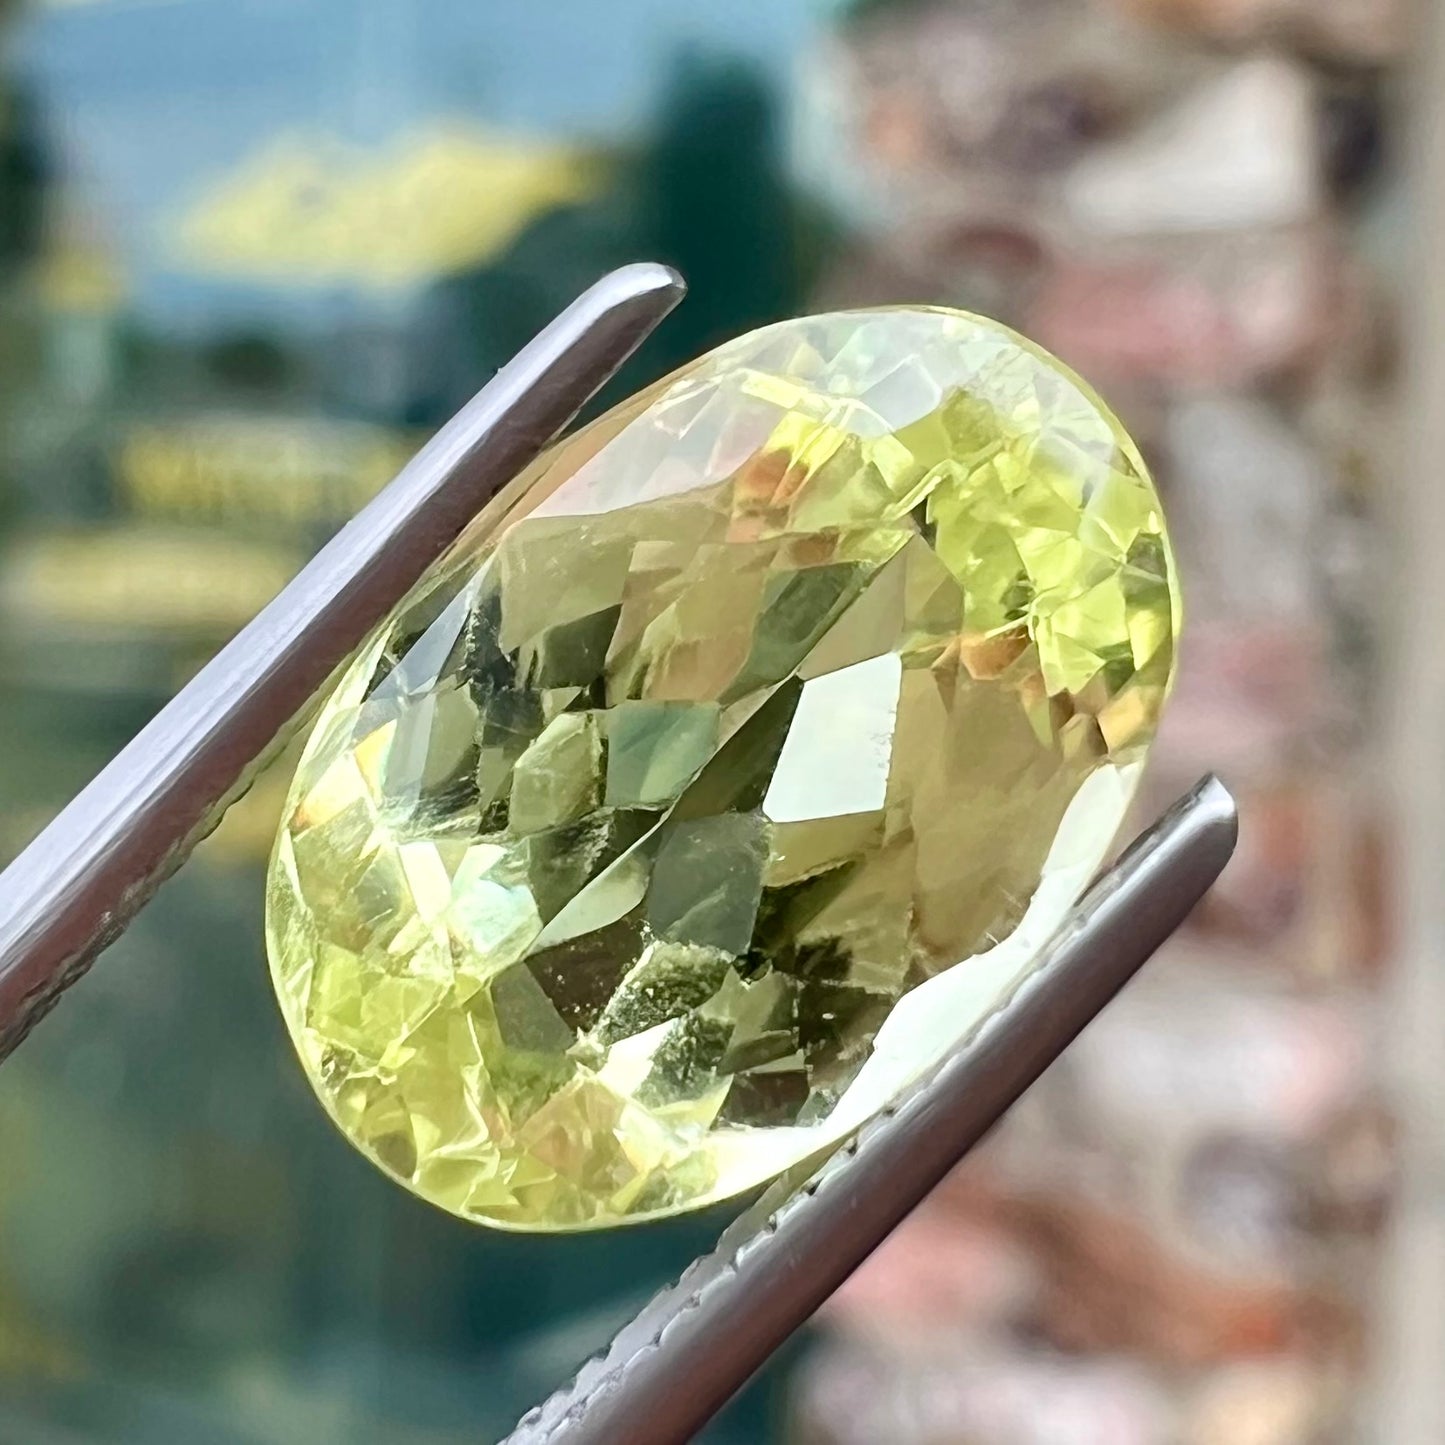 A loose, faceted oval cut chrysoberyl gemstone.  The stone is a greenish yellow color.